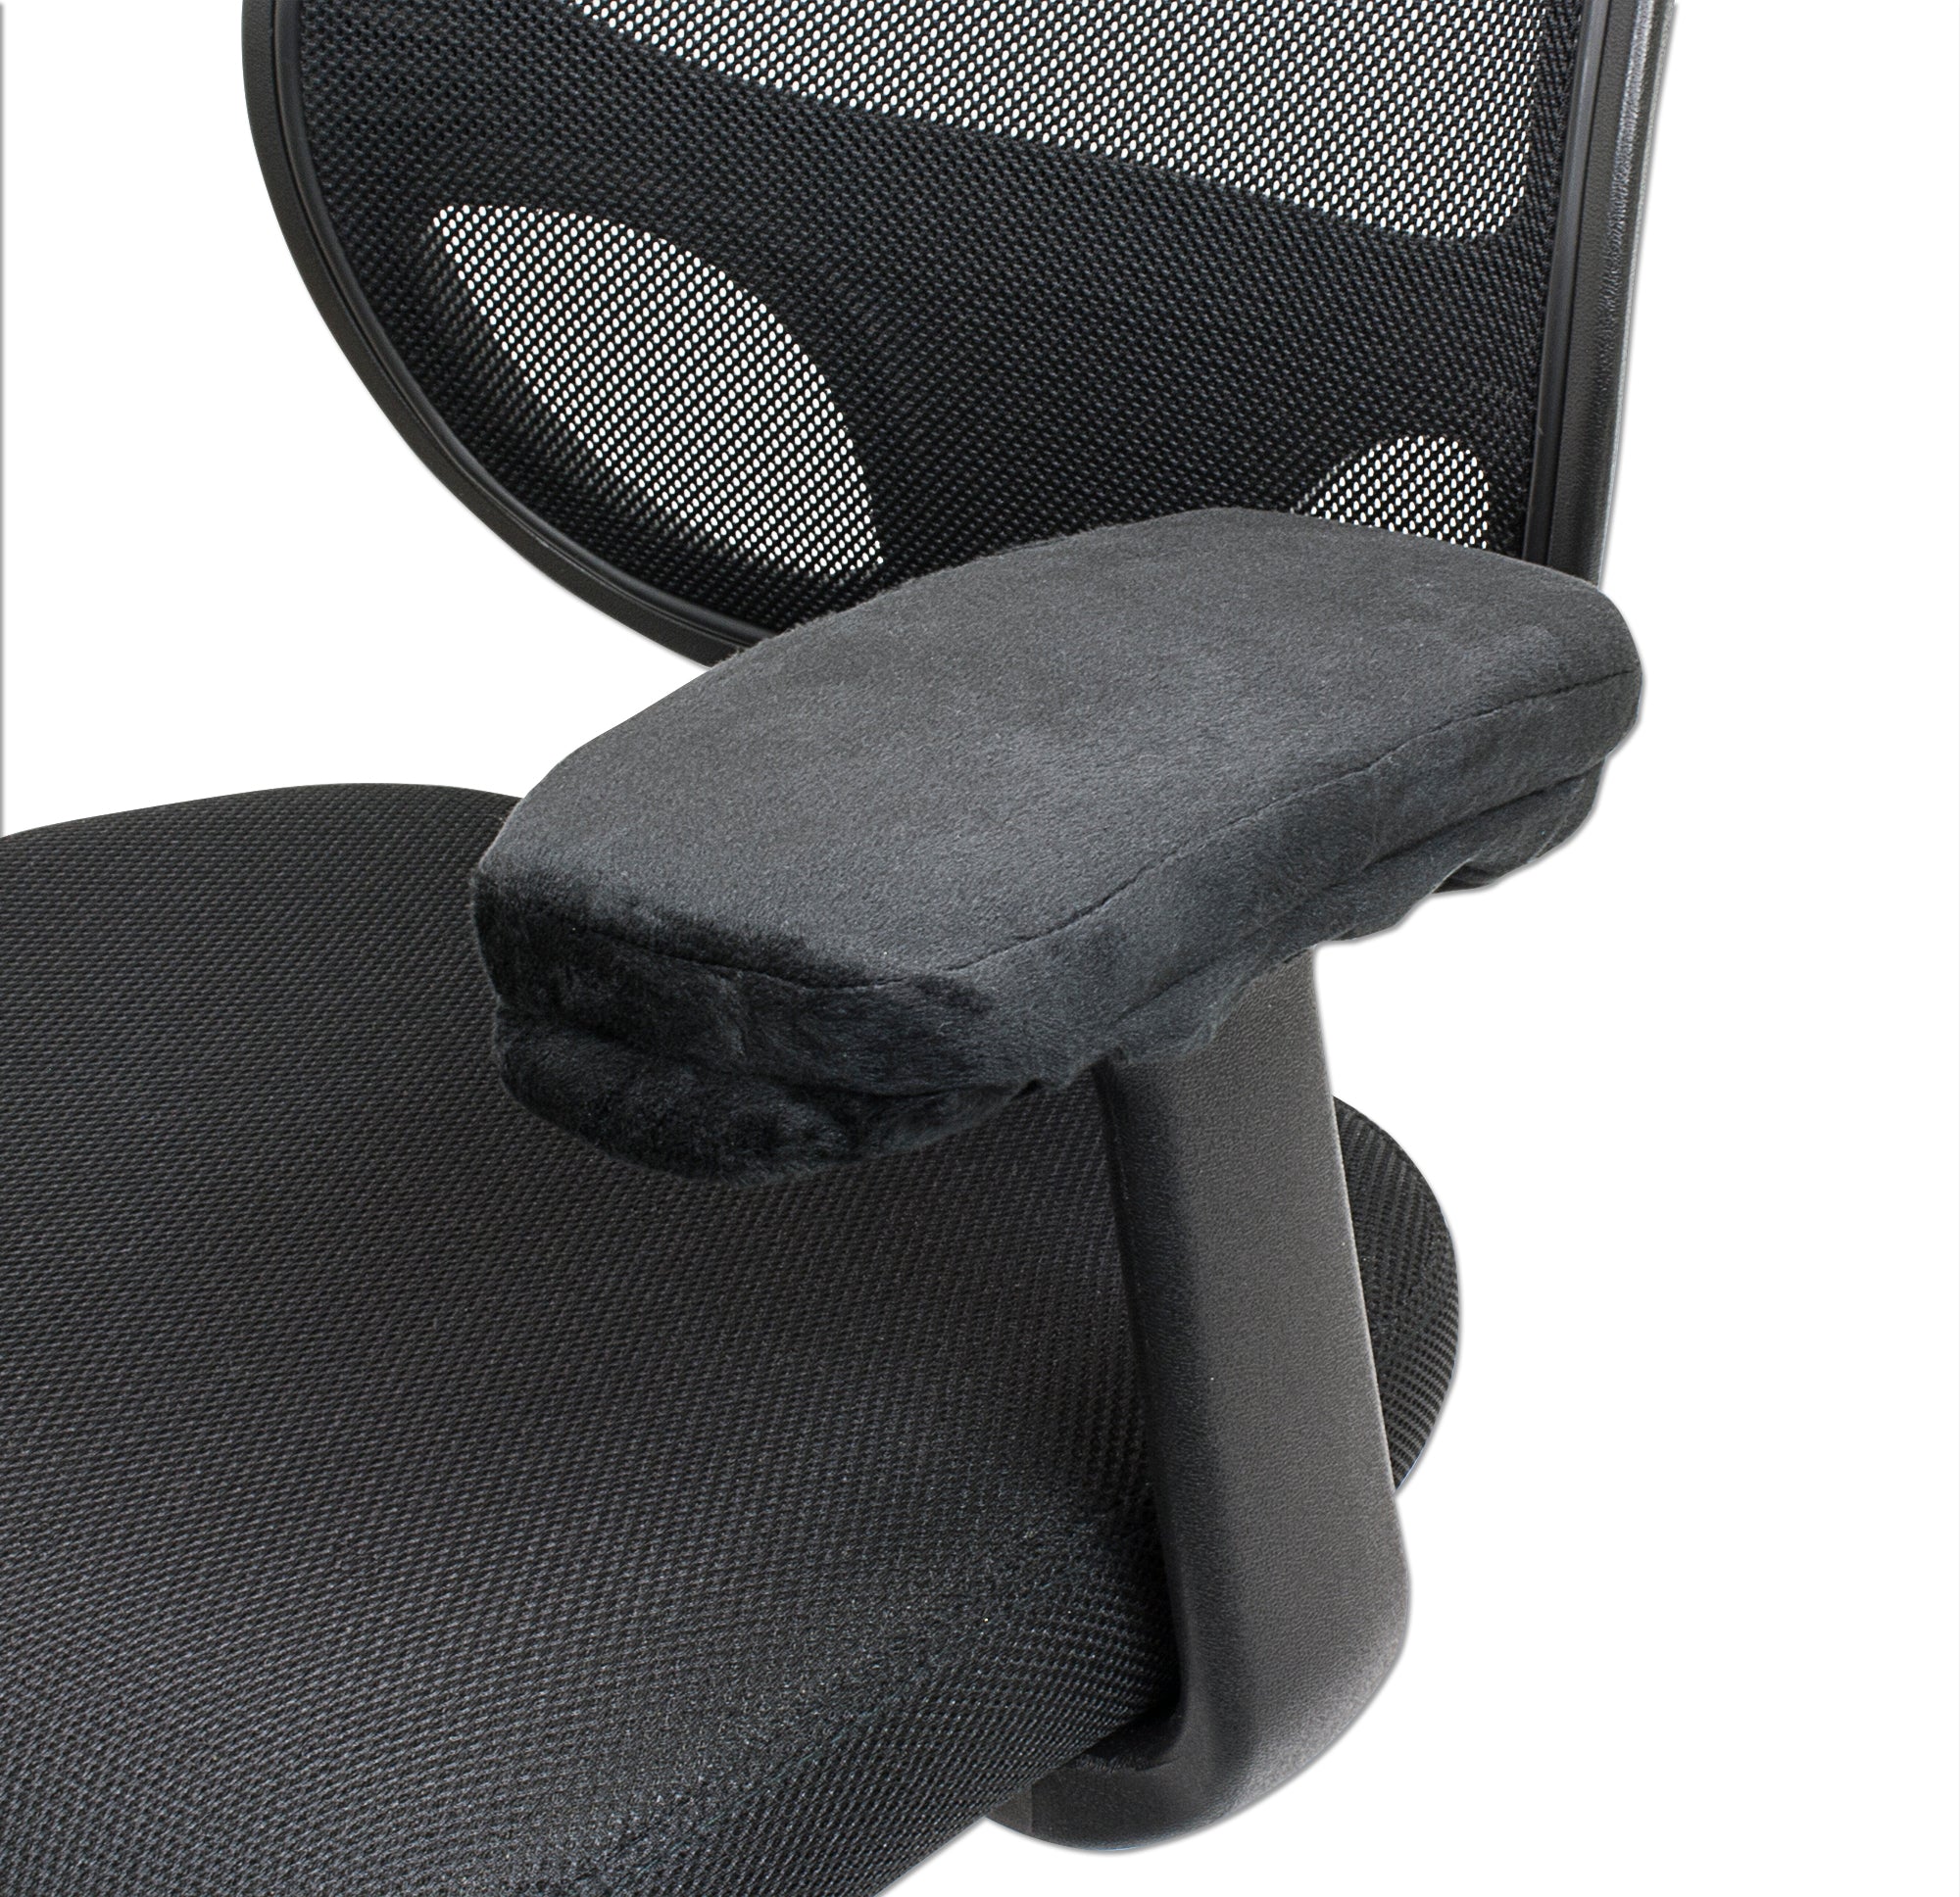 Eurow Foam Office Chair Armrest Support Pads to Eliminate Arm and Elbow Pain and Soreness 2 Pack